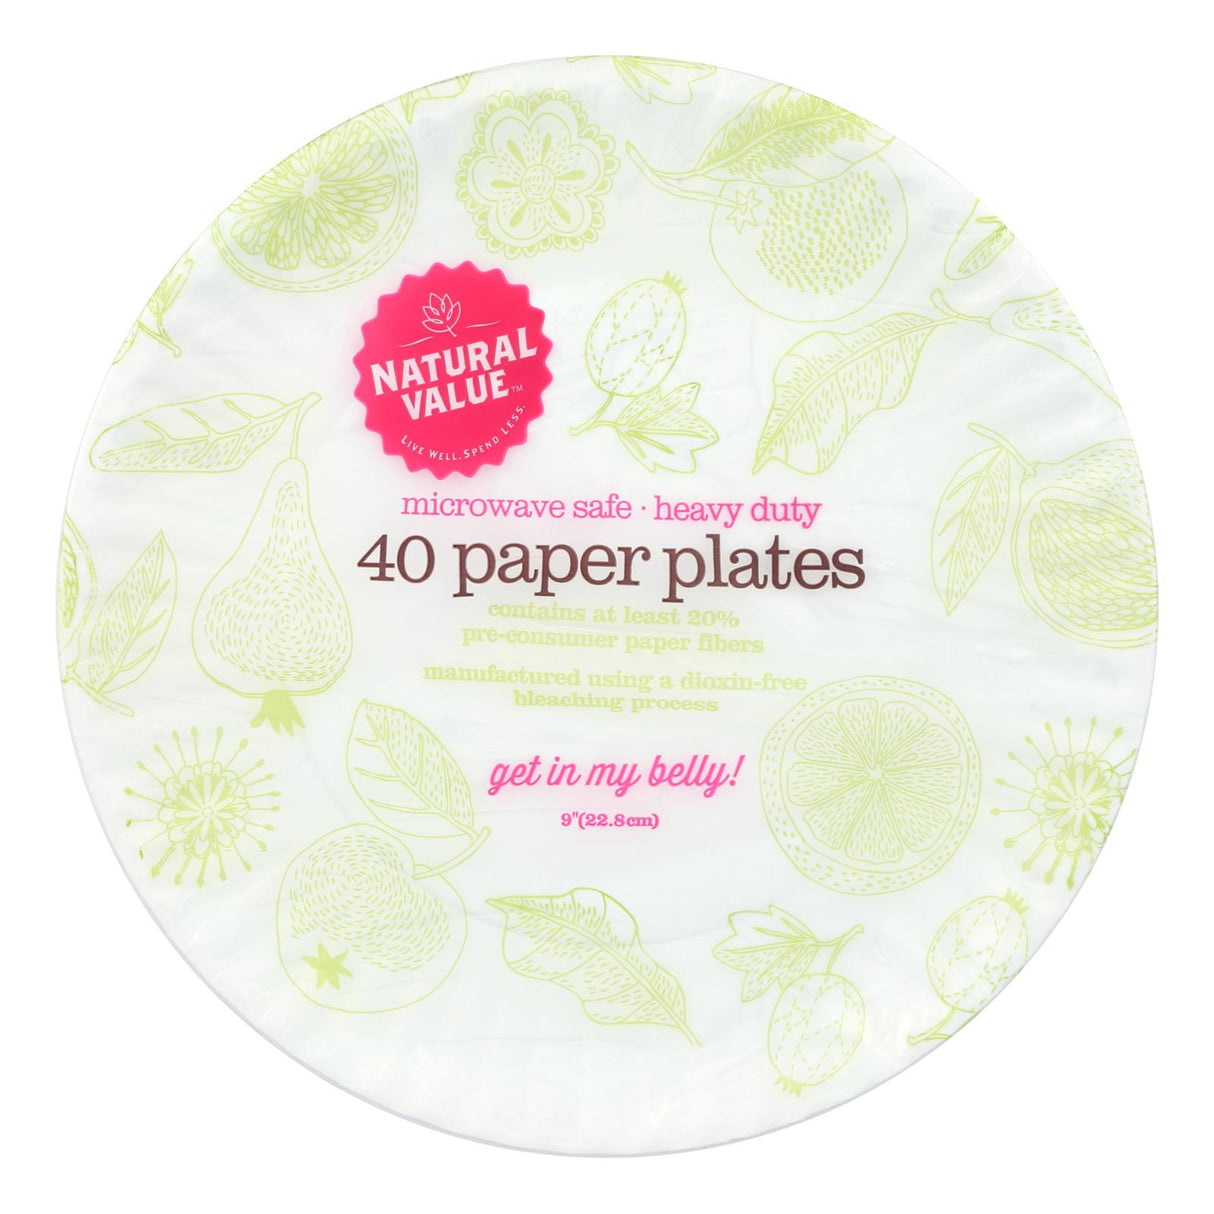 Natural Value Paper Plates, Recyclable, 40-Count (Case of 24) - Cozy Farm 